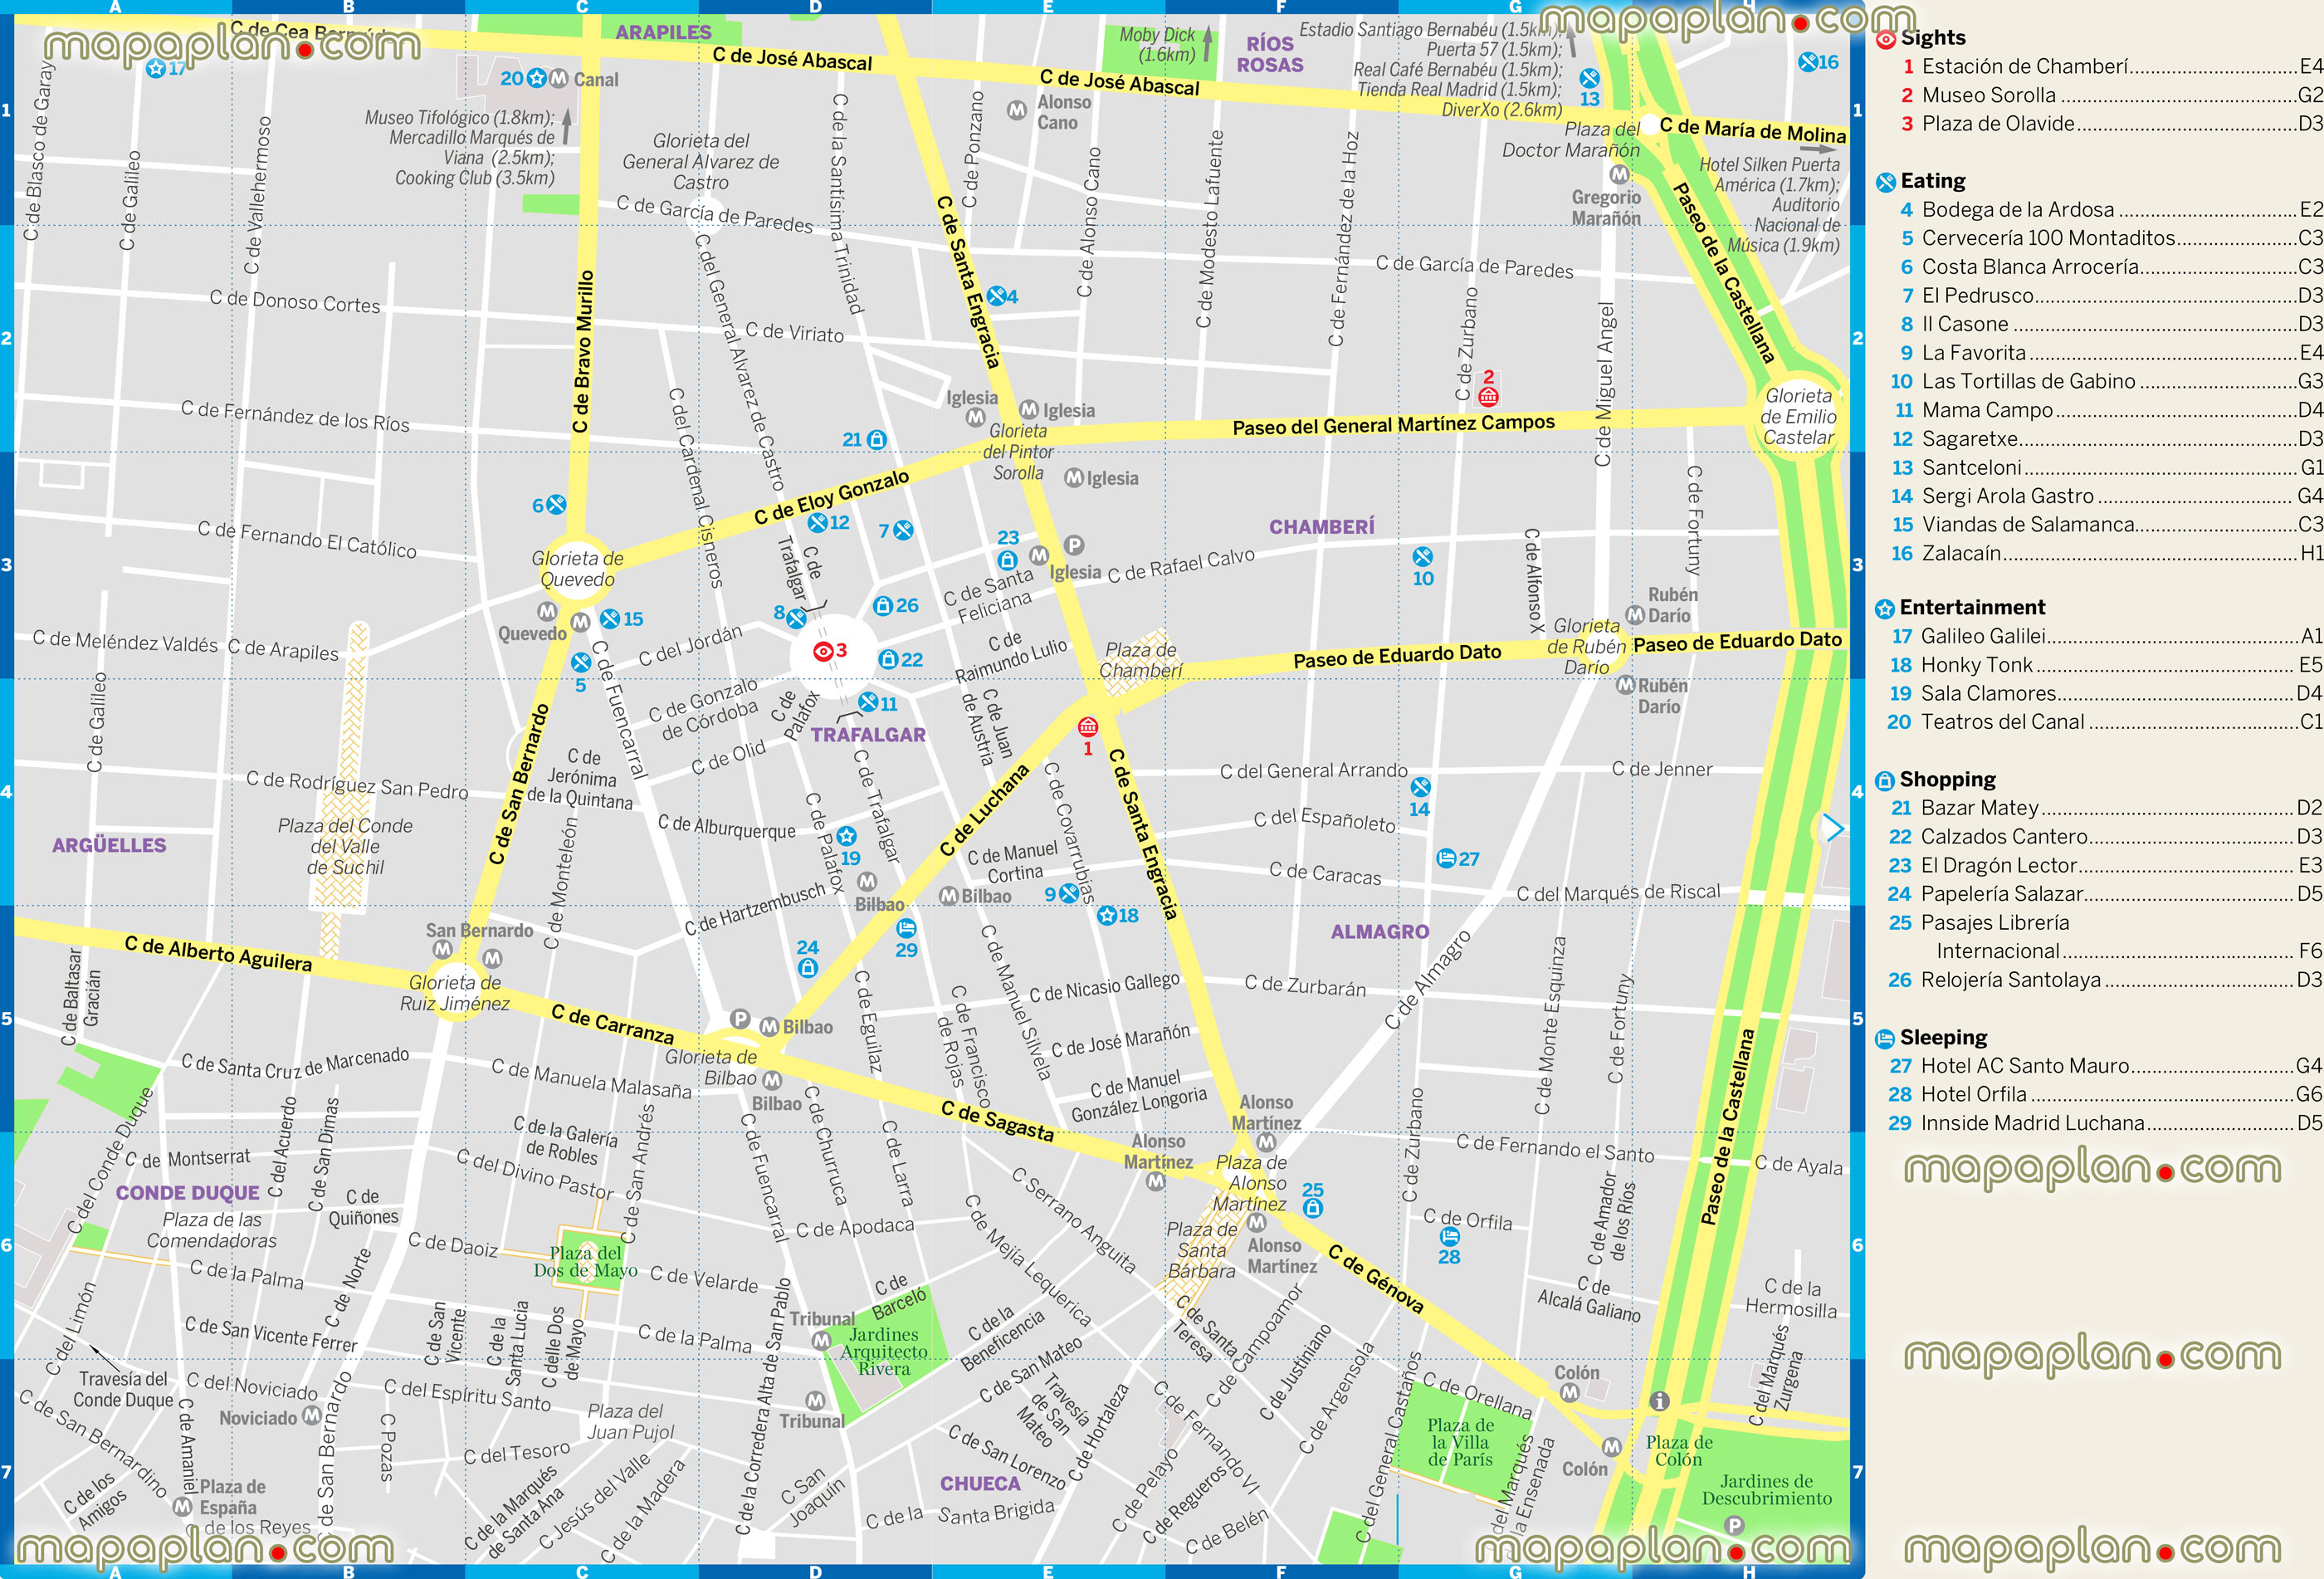 chamberi area maps Madrid Top tourist attractions map